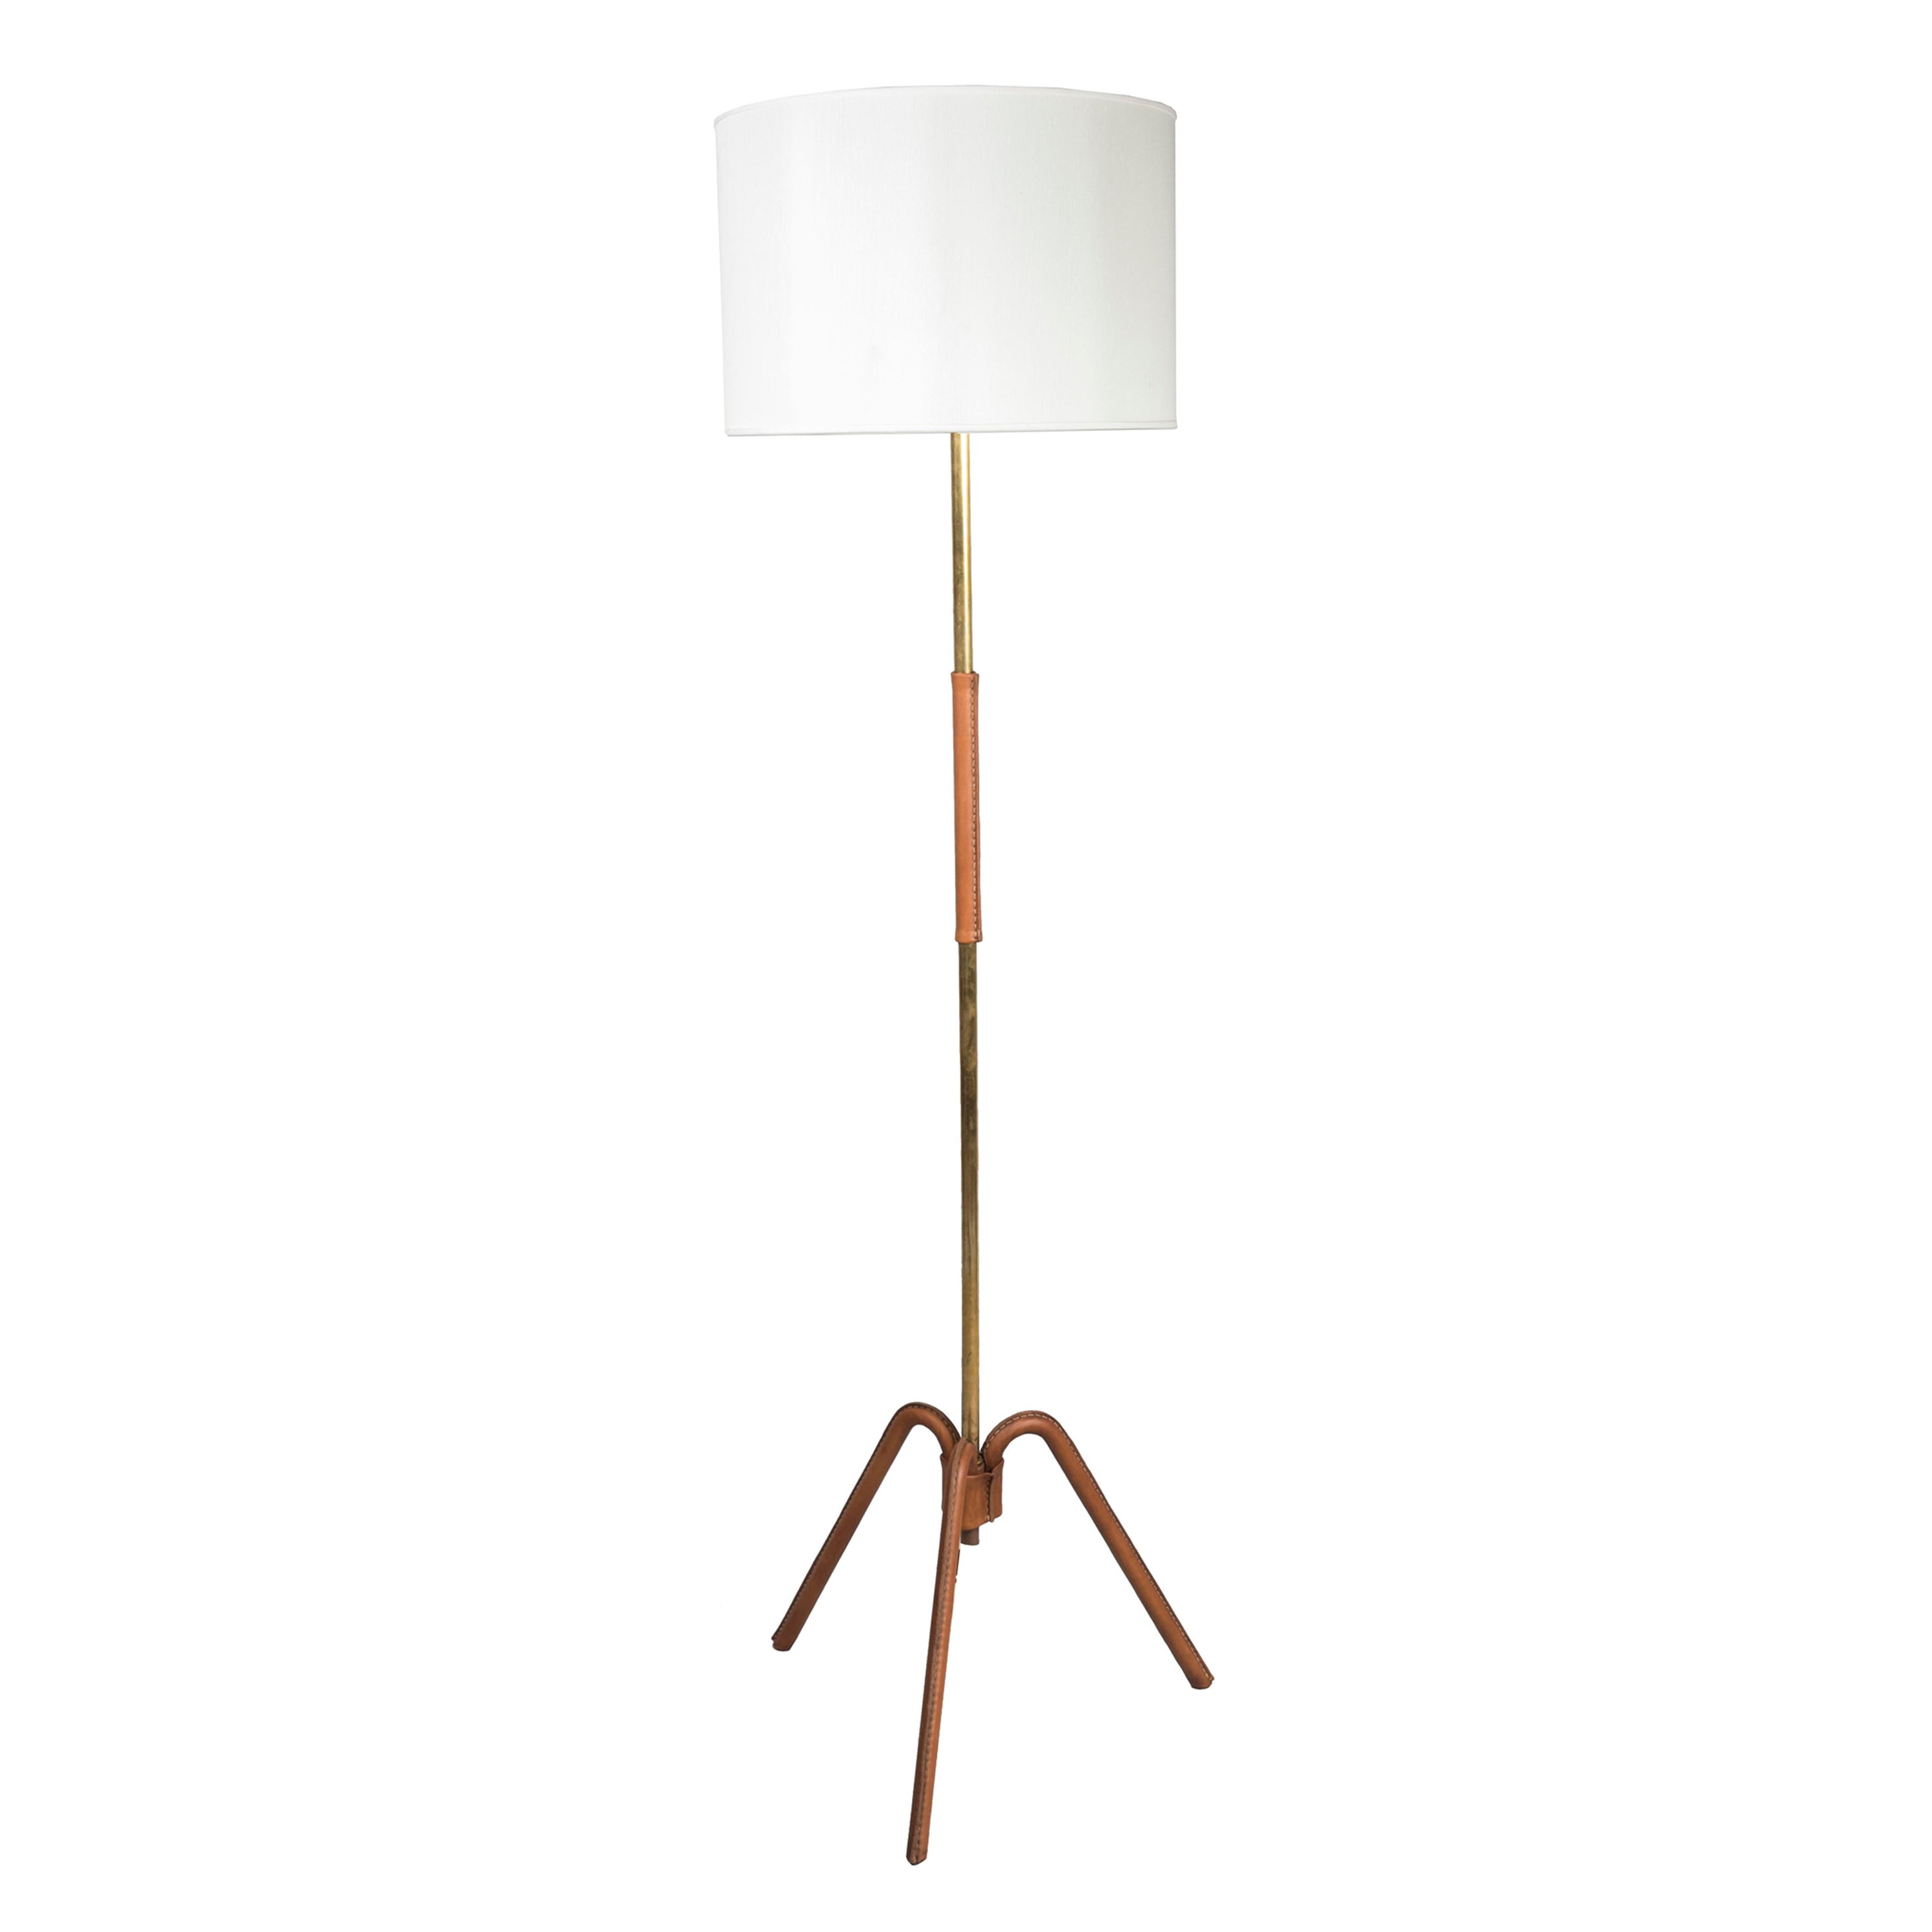 1950's Stitched Leather Floor Lamp by Jacques Adnet For Sale